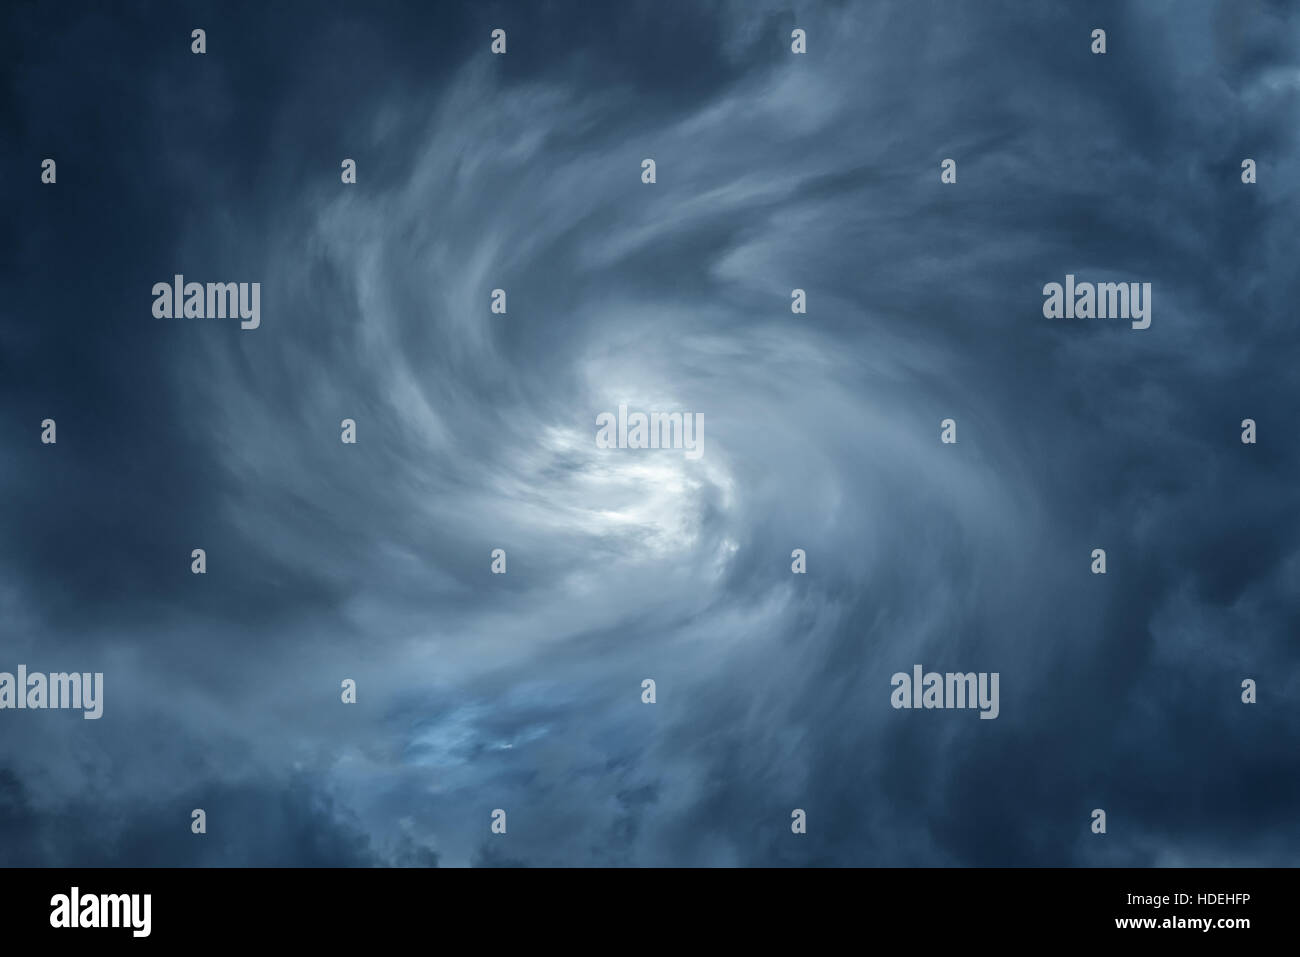 White Hole in the Whirlwind of dark storm clouds Stock Photo